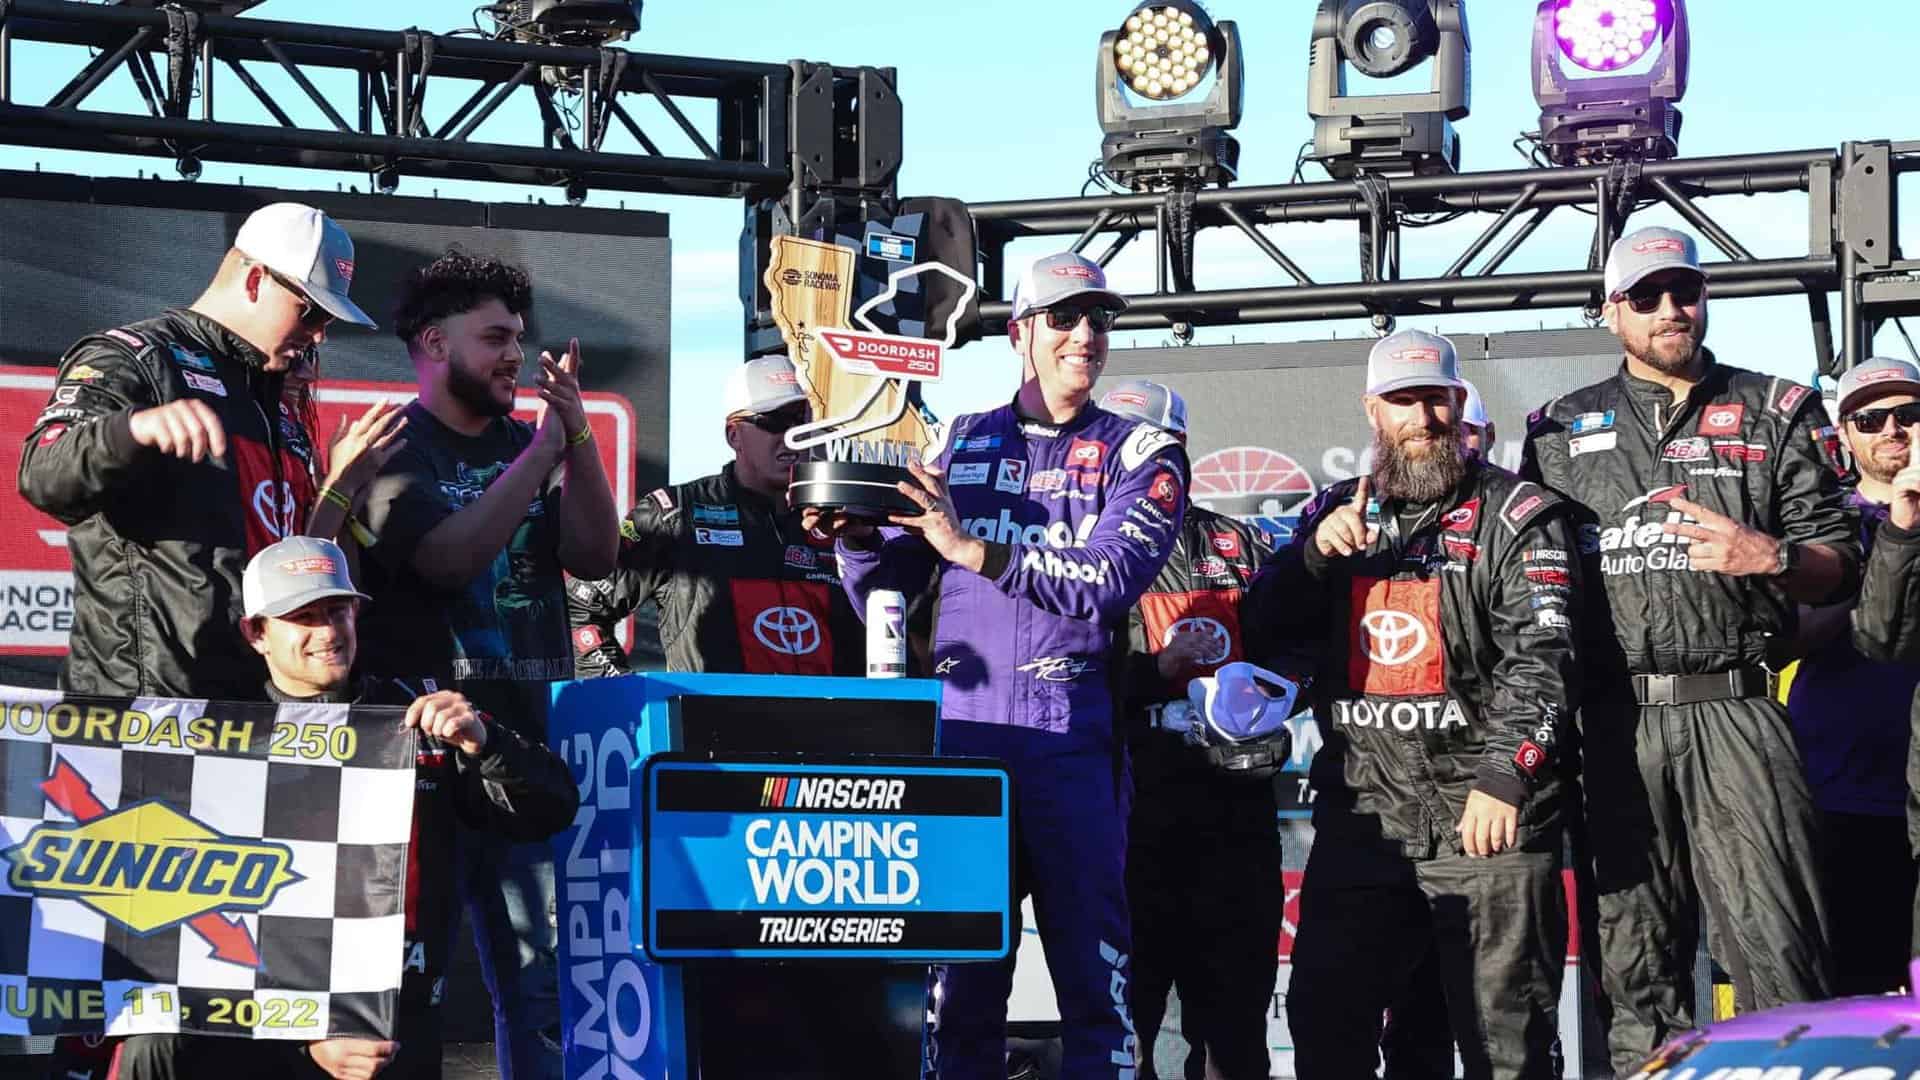 Kyle Busch wins the DoorDash 250 at Sonoma Raceway for Kyle Busch Motorsports in the NASCAR Camping World Truck Series.